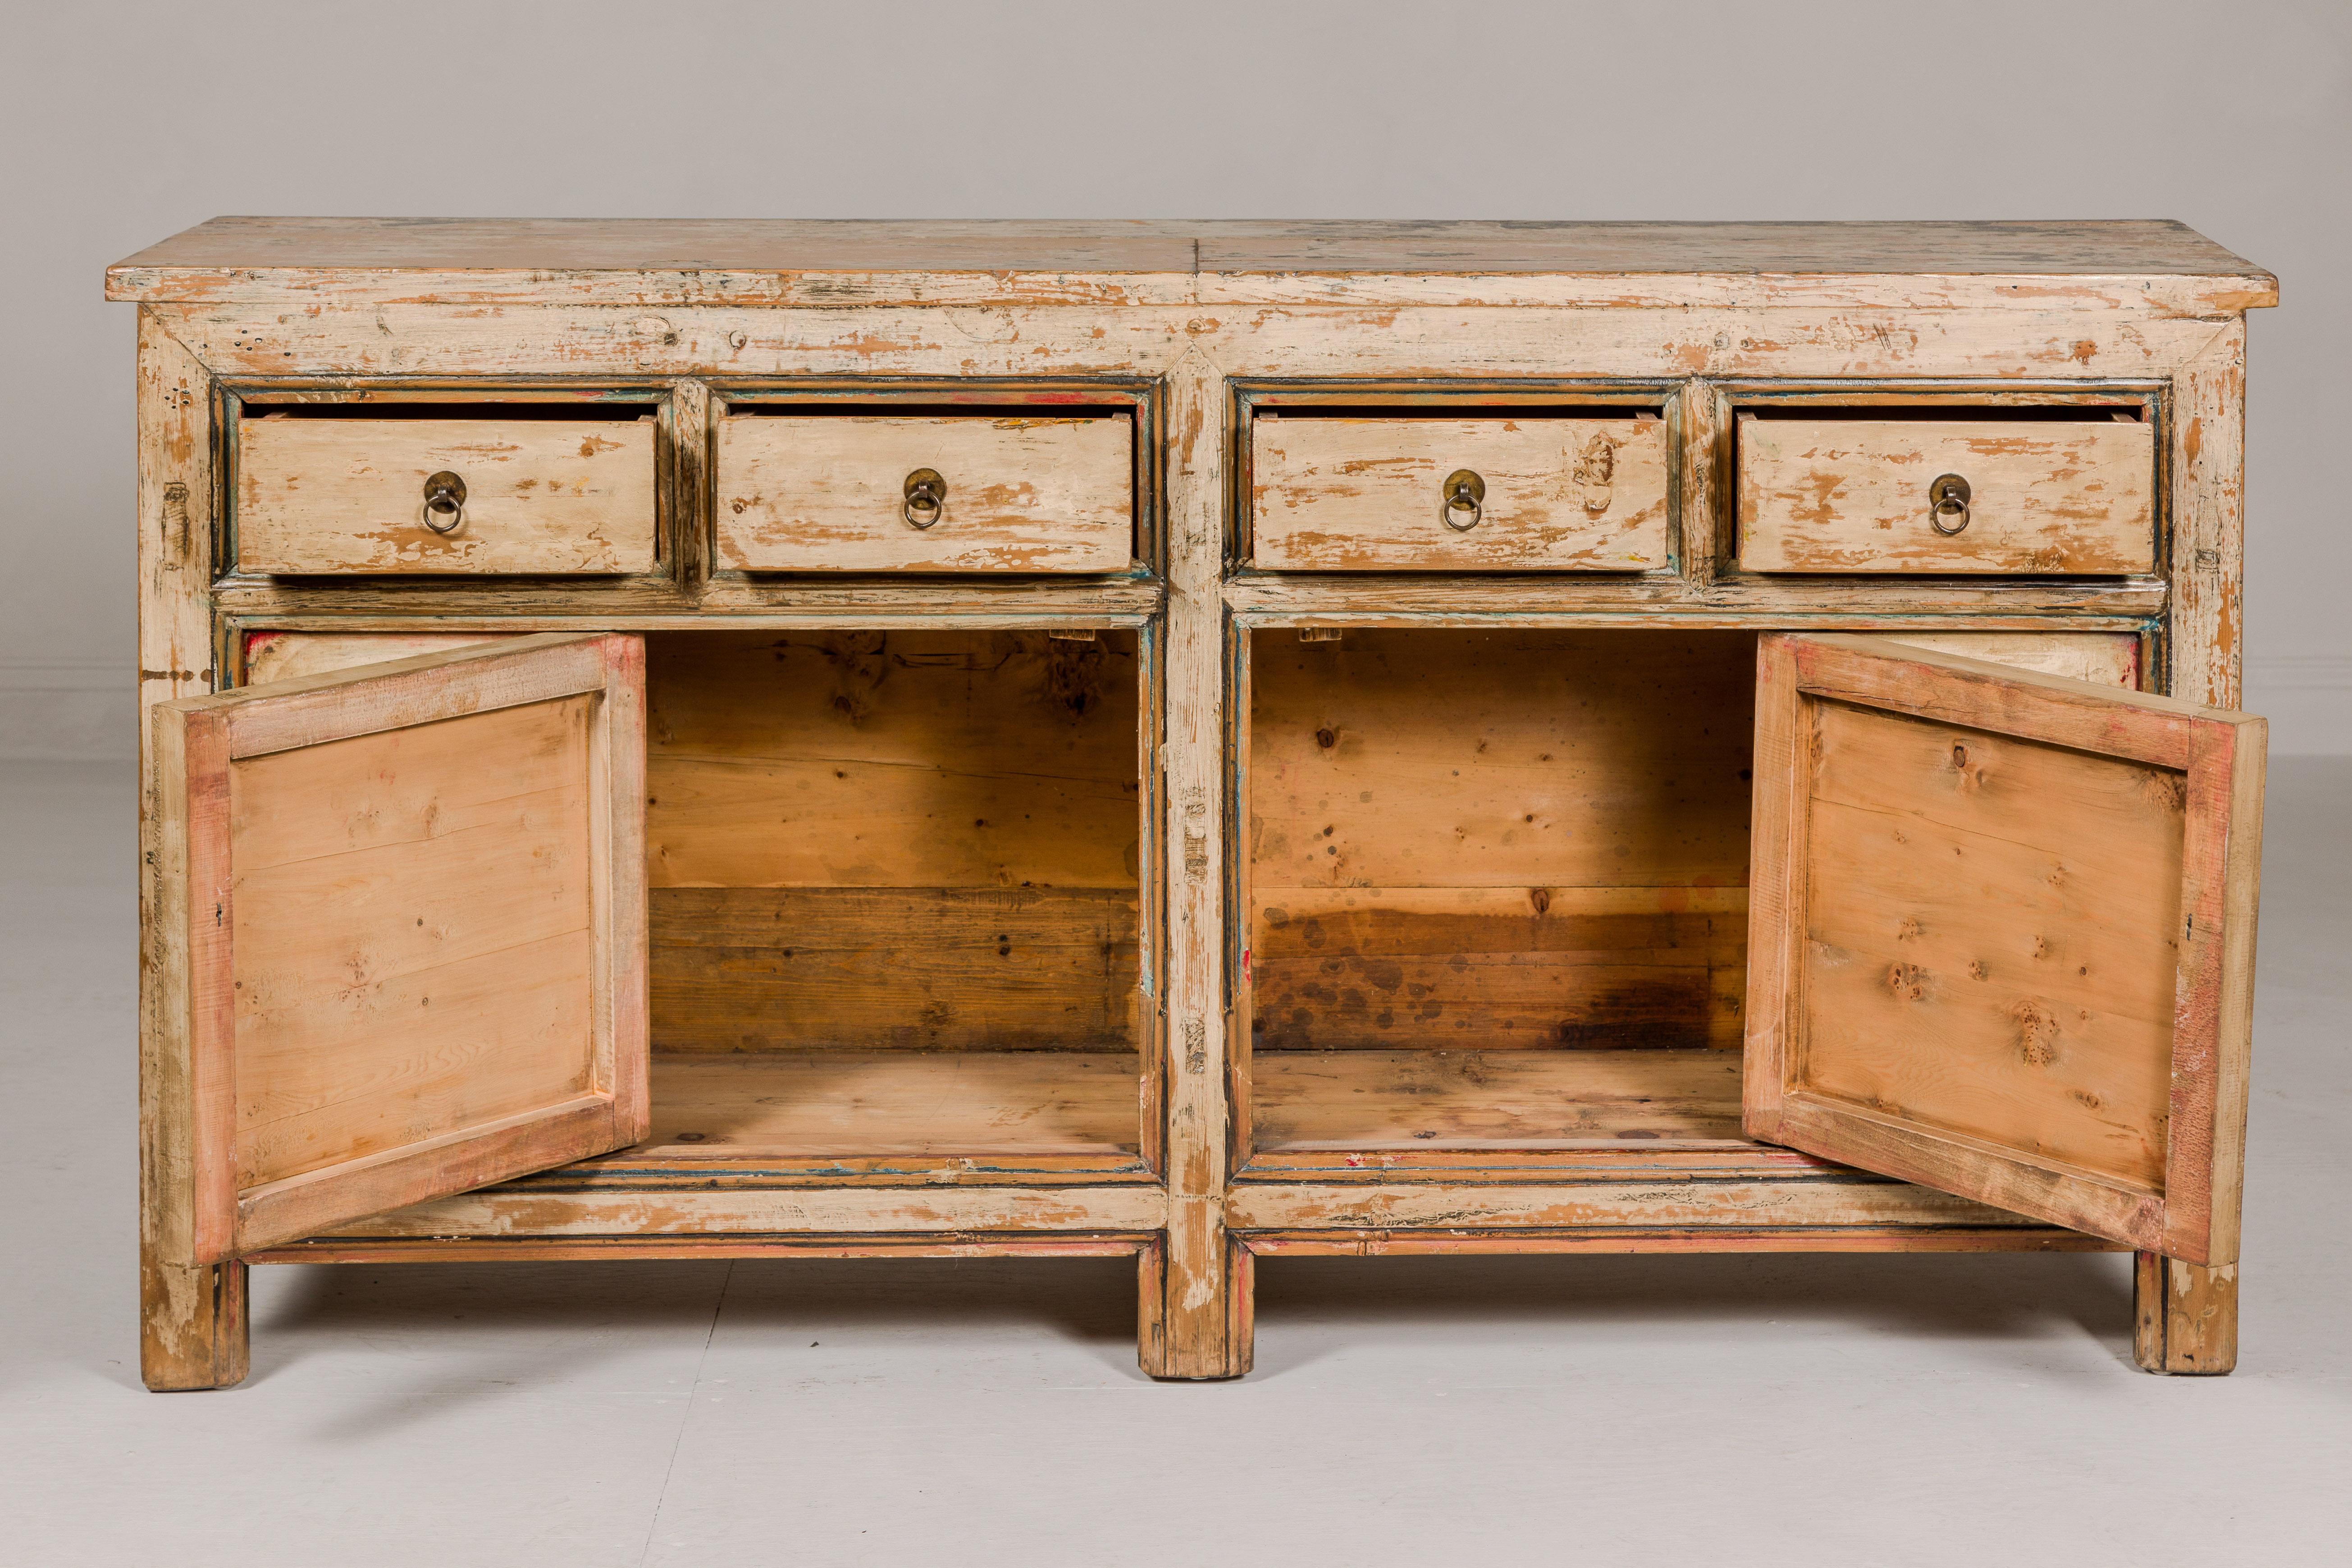 Painted Elm Rustic Sideboard with Two Doors, Four Drawers and Distressed Finish For Sale 3